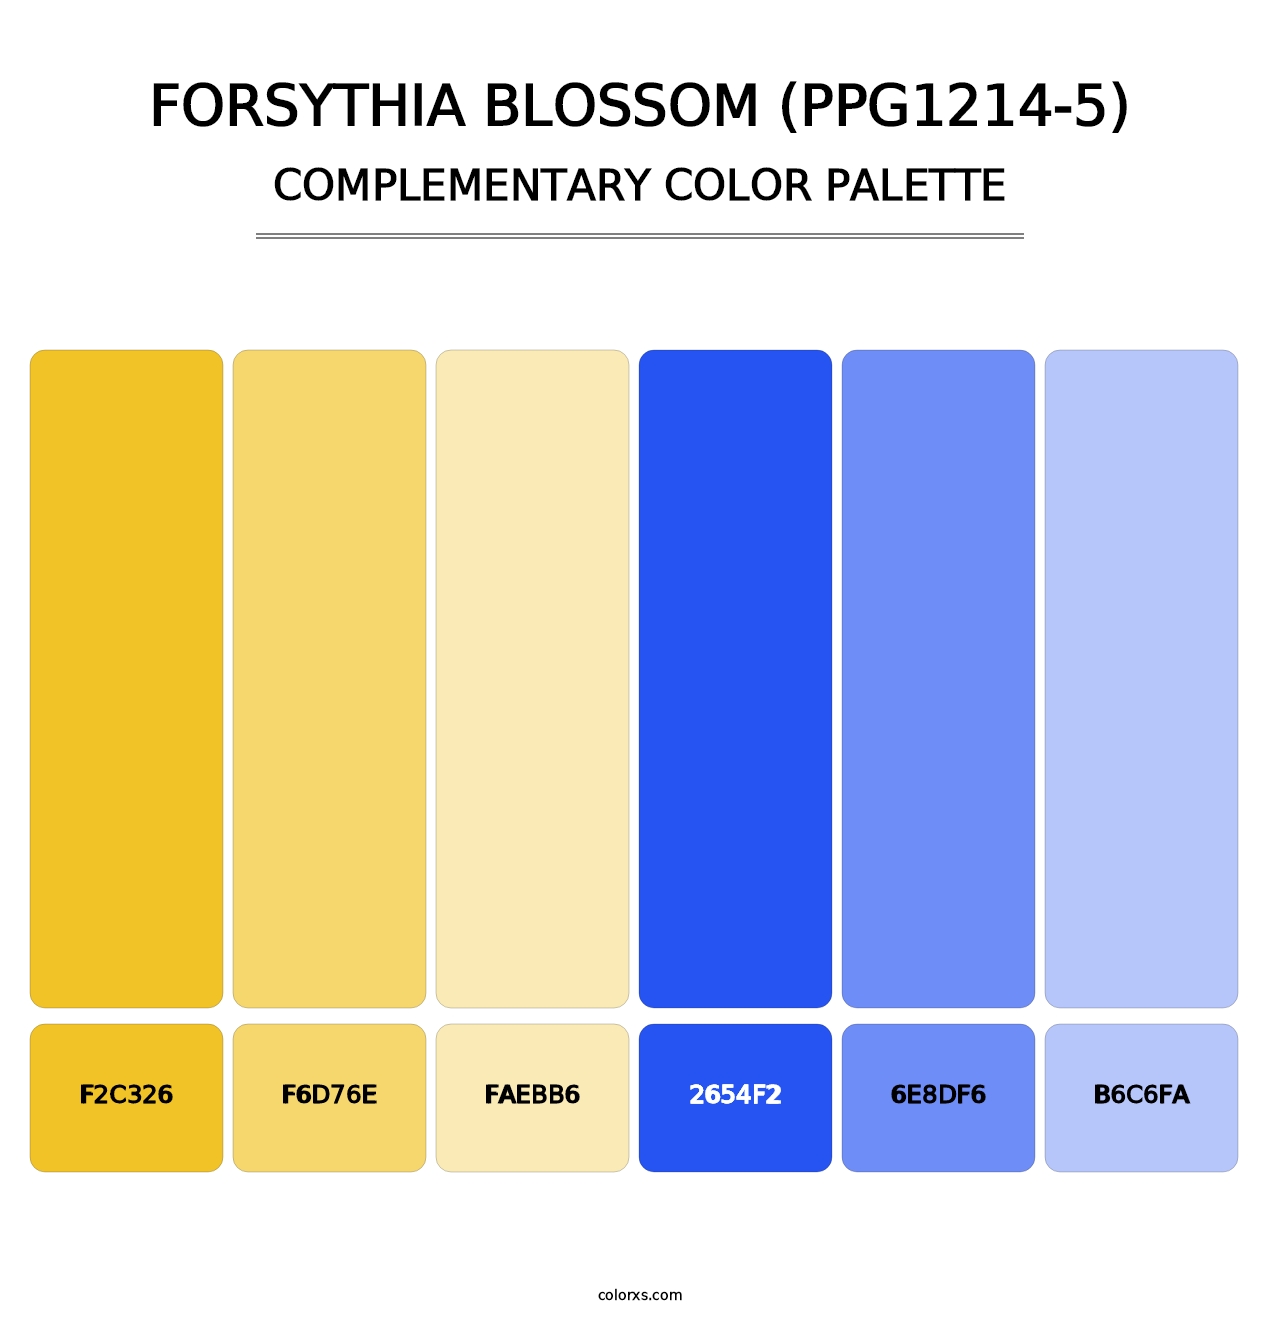 Forsythia Blossom (PPG1214-5) - Complementary Color Palette